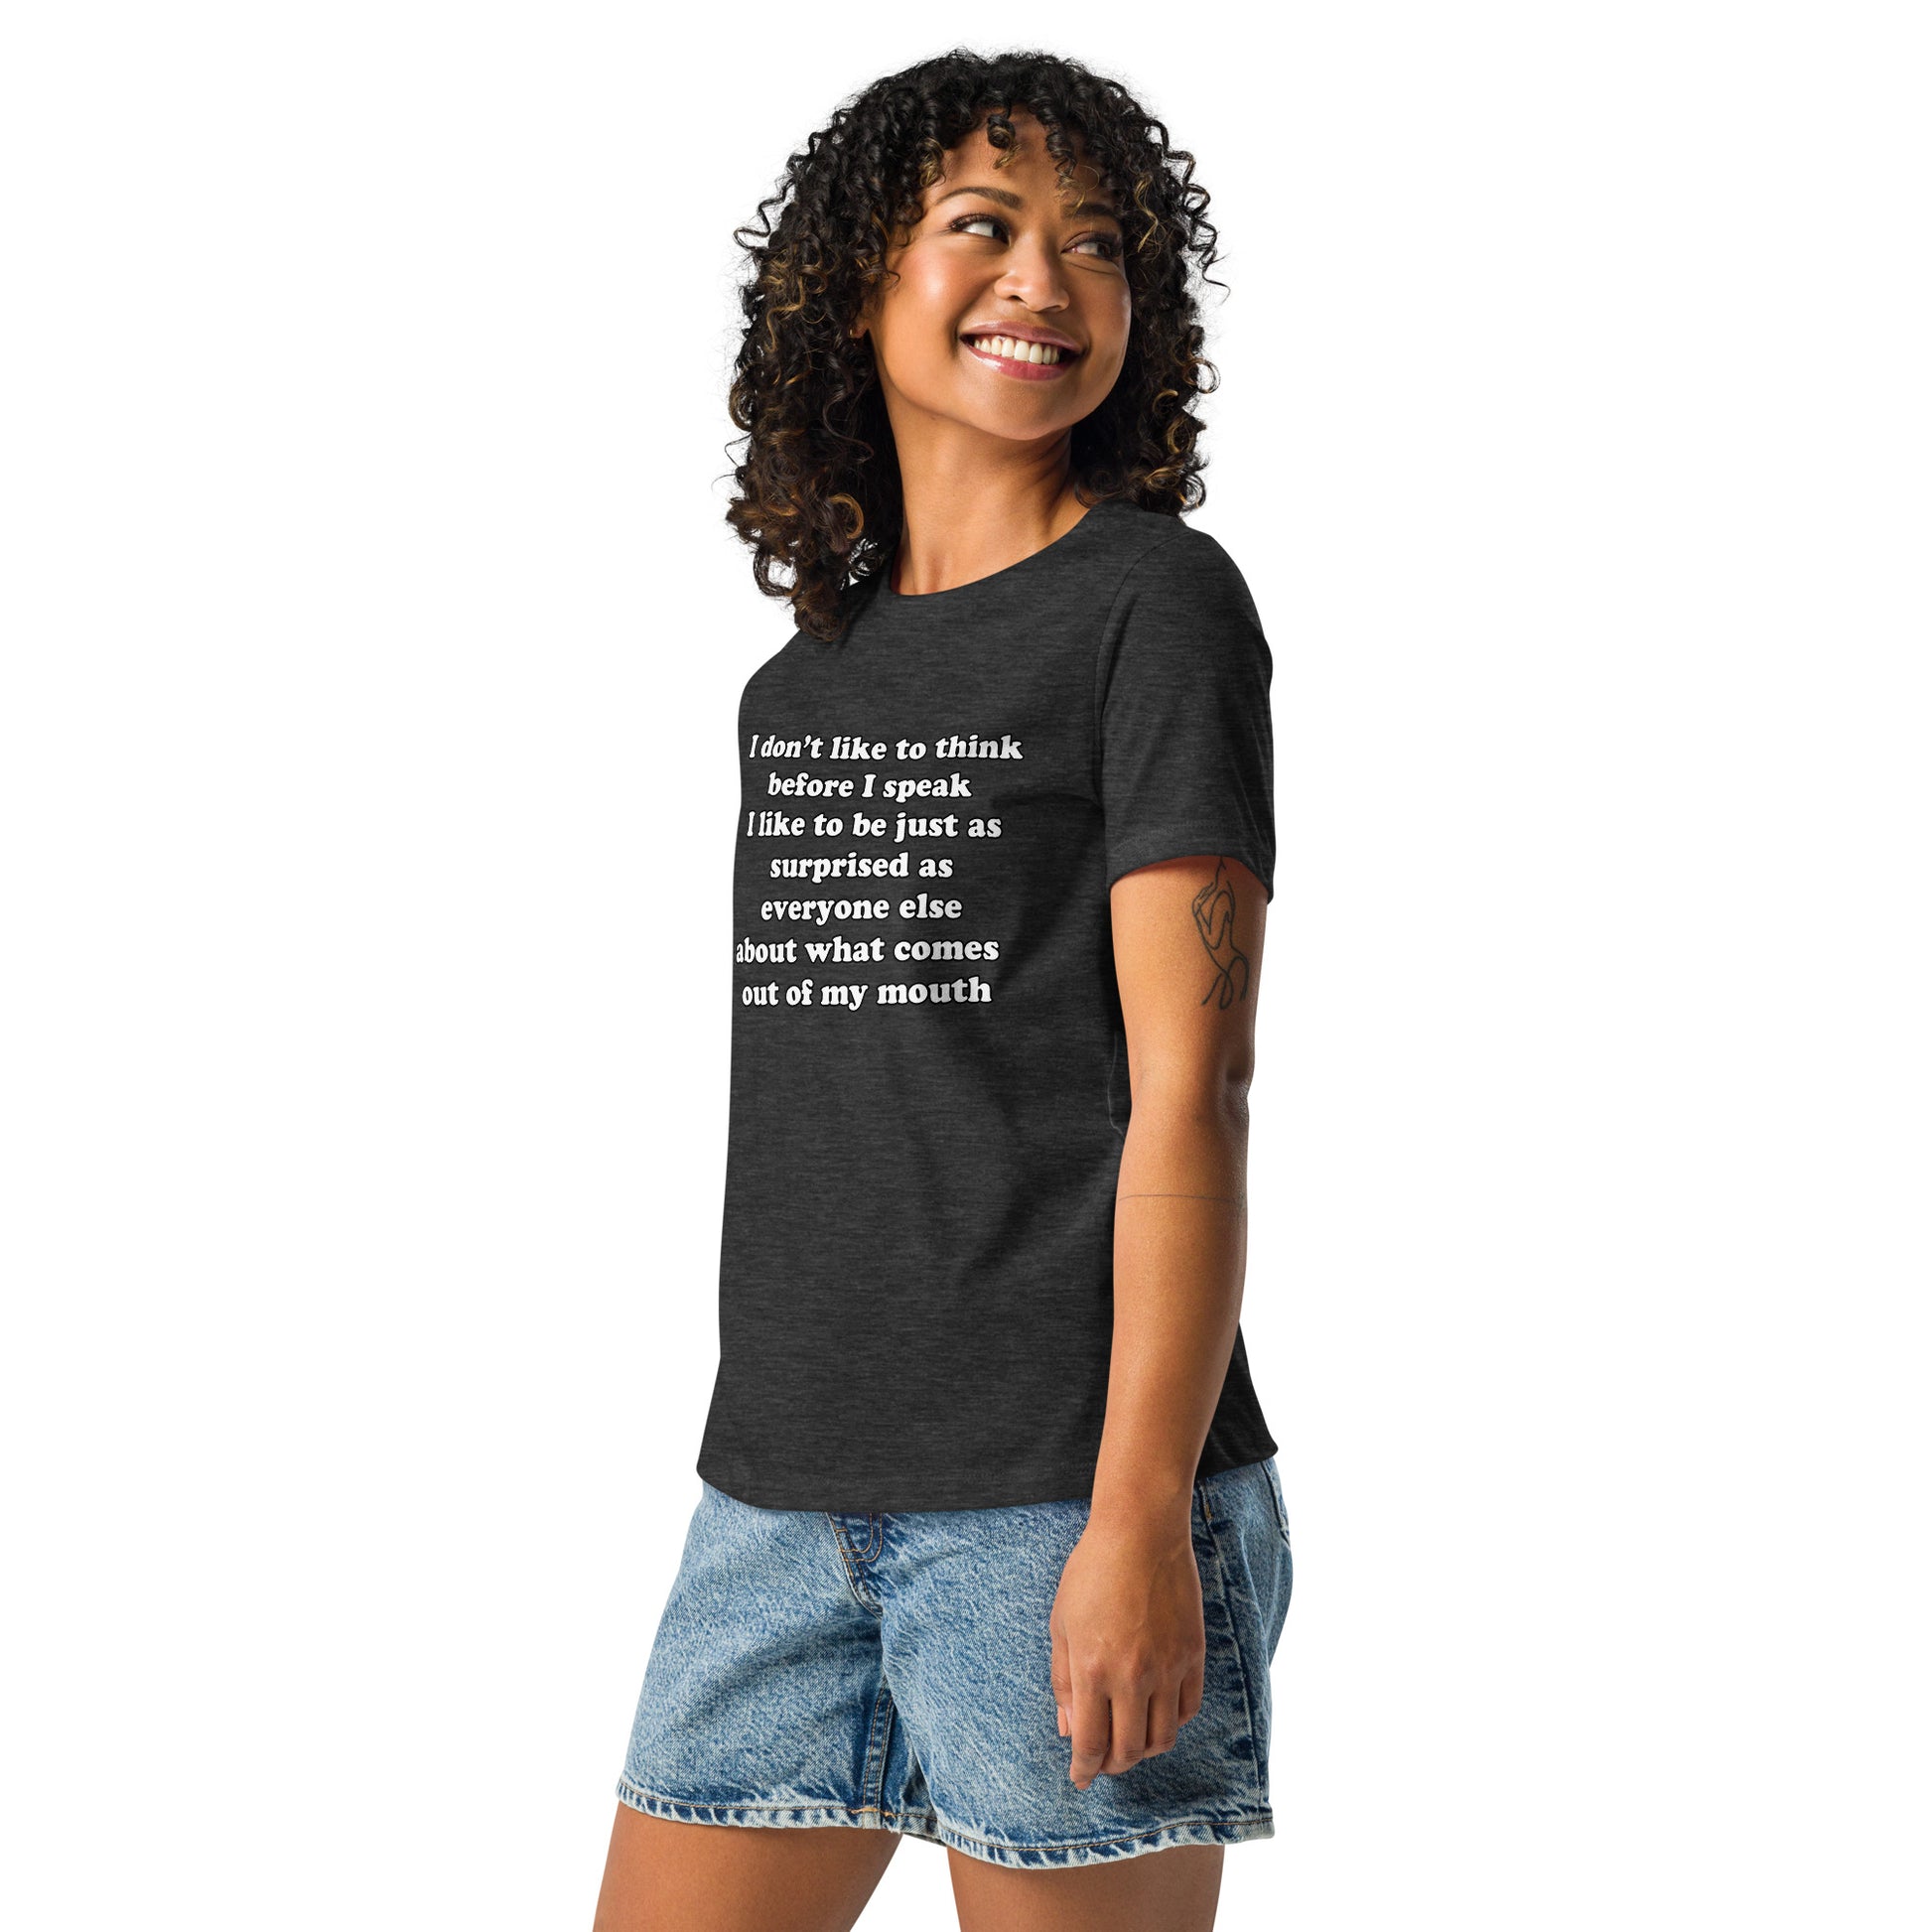 Woman with dark grey t-shirt with text “I don't think before I speak Just as serprised as everyone about what comes out of my mouth"